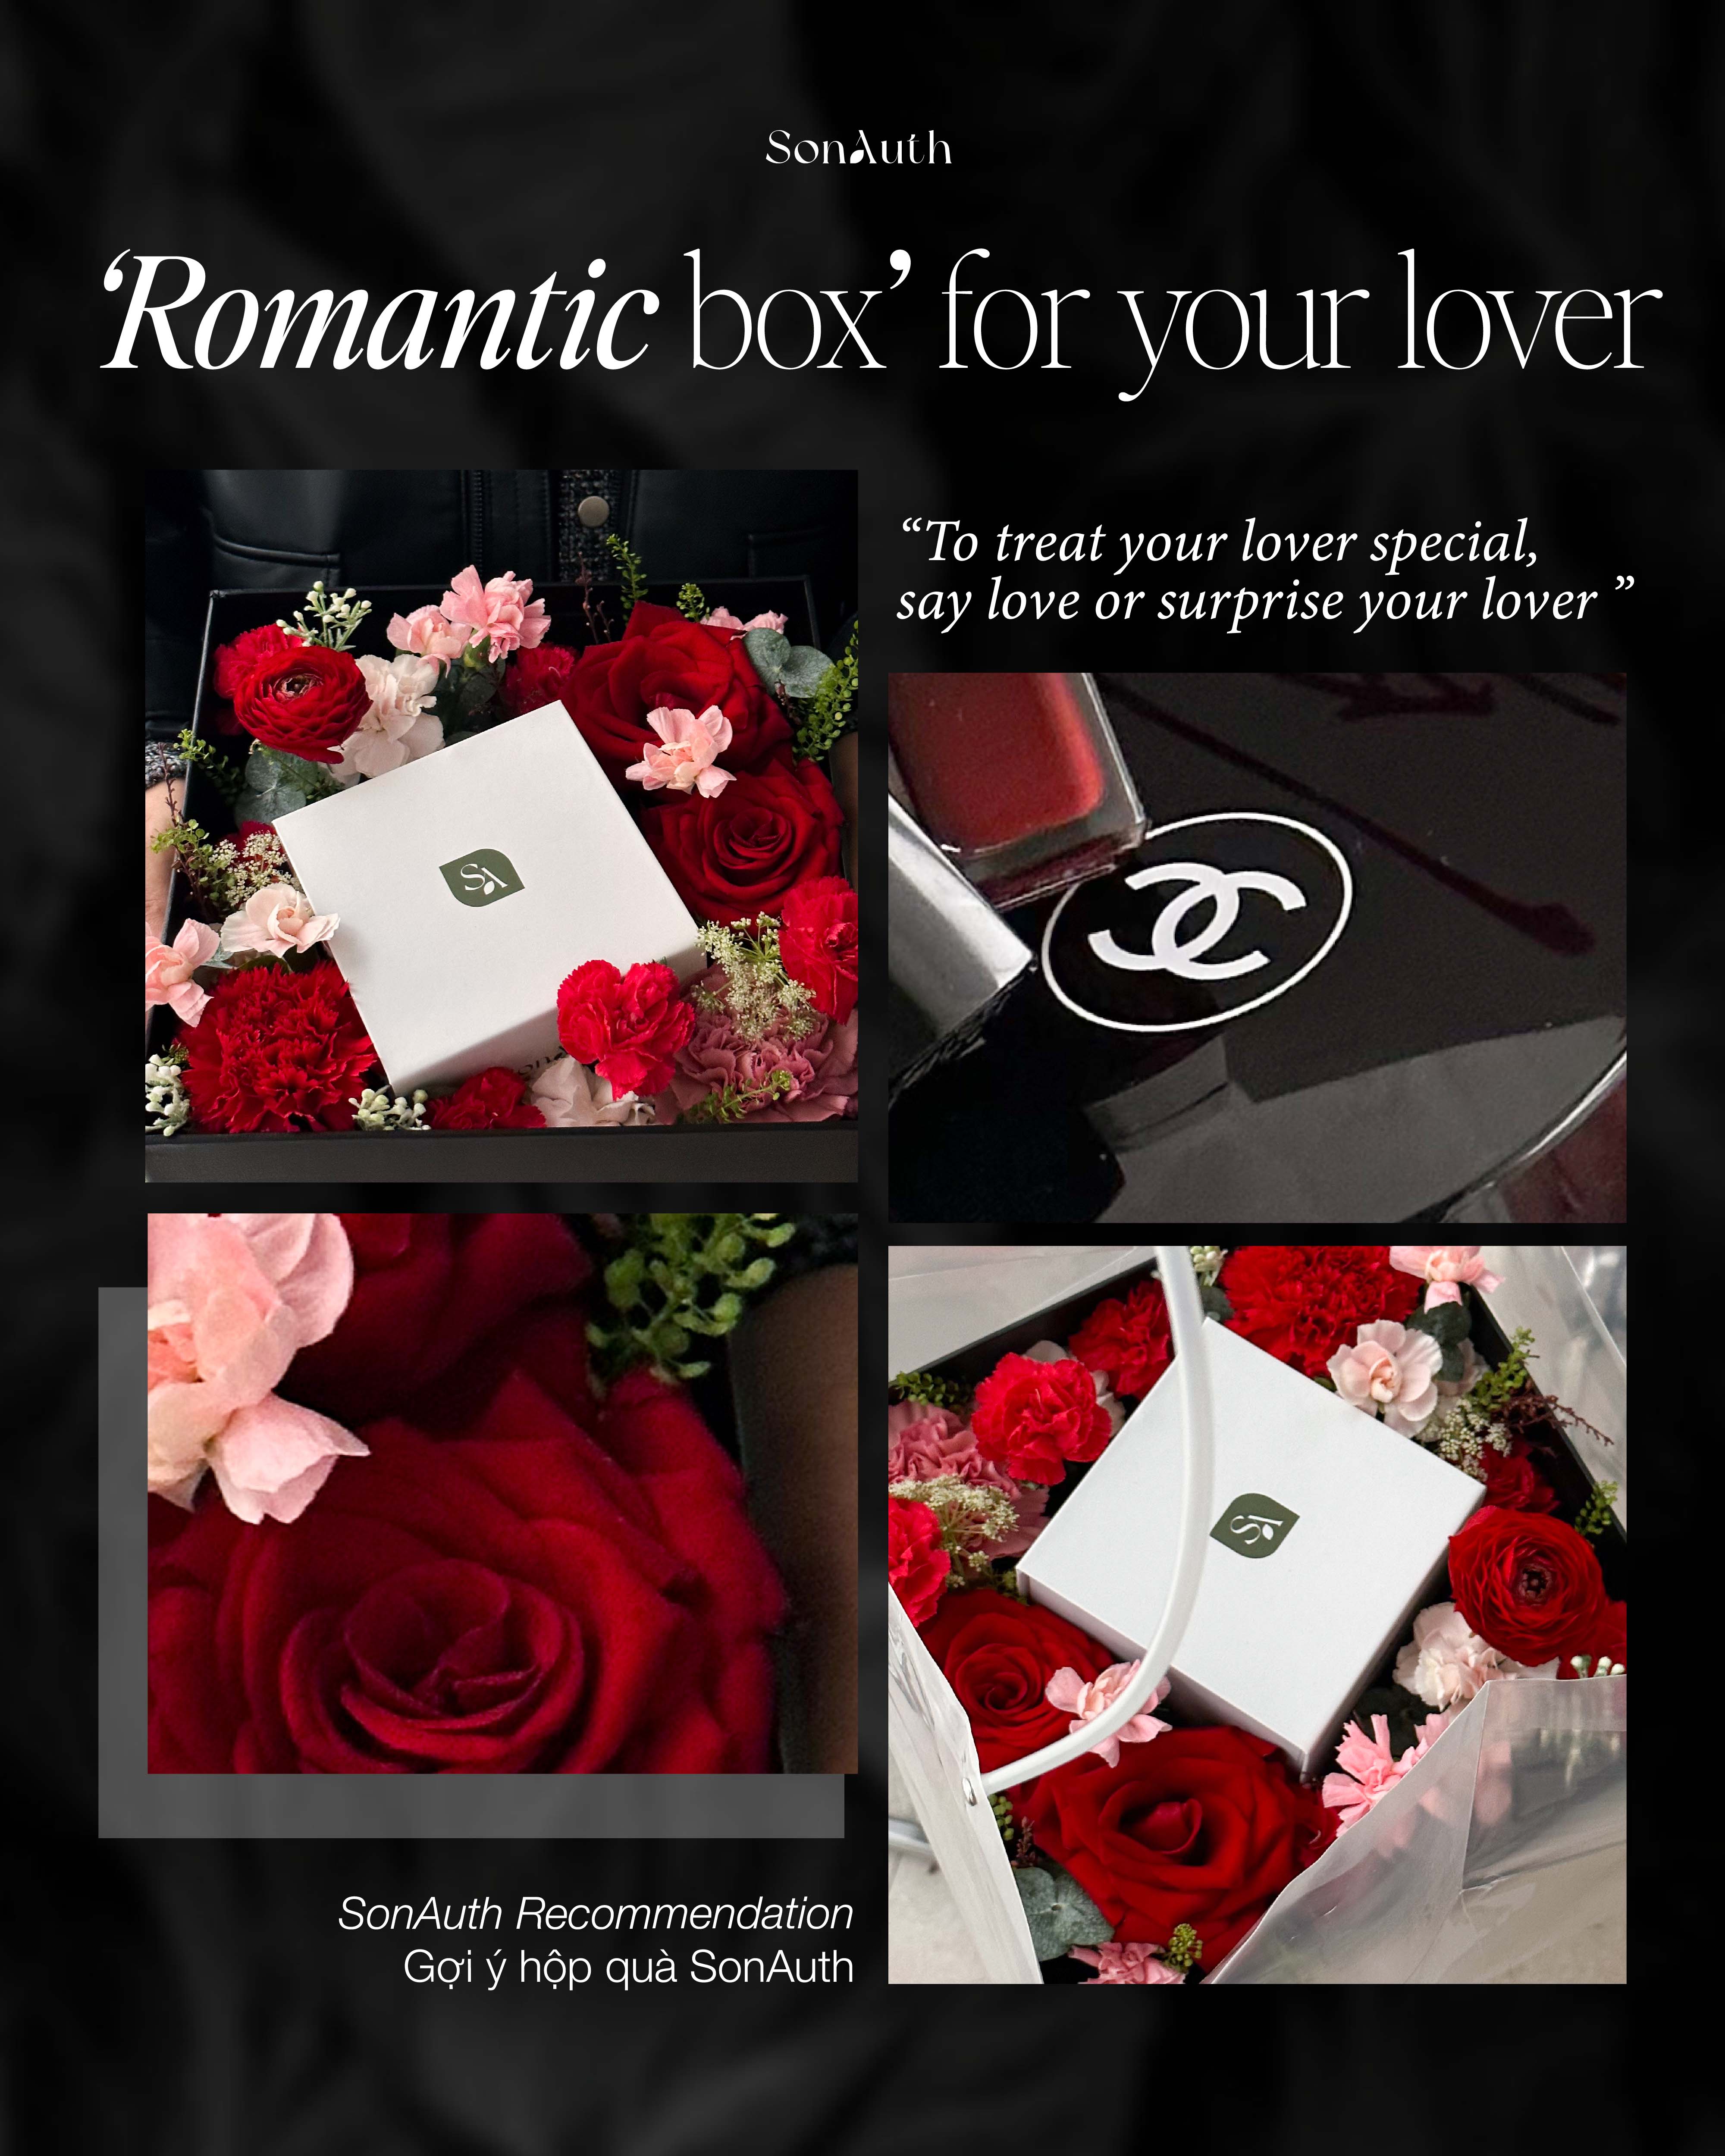 BOX HOA VALENTINE "LOVE BOX FOR YOUR LOVER"